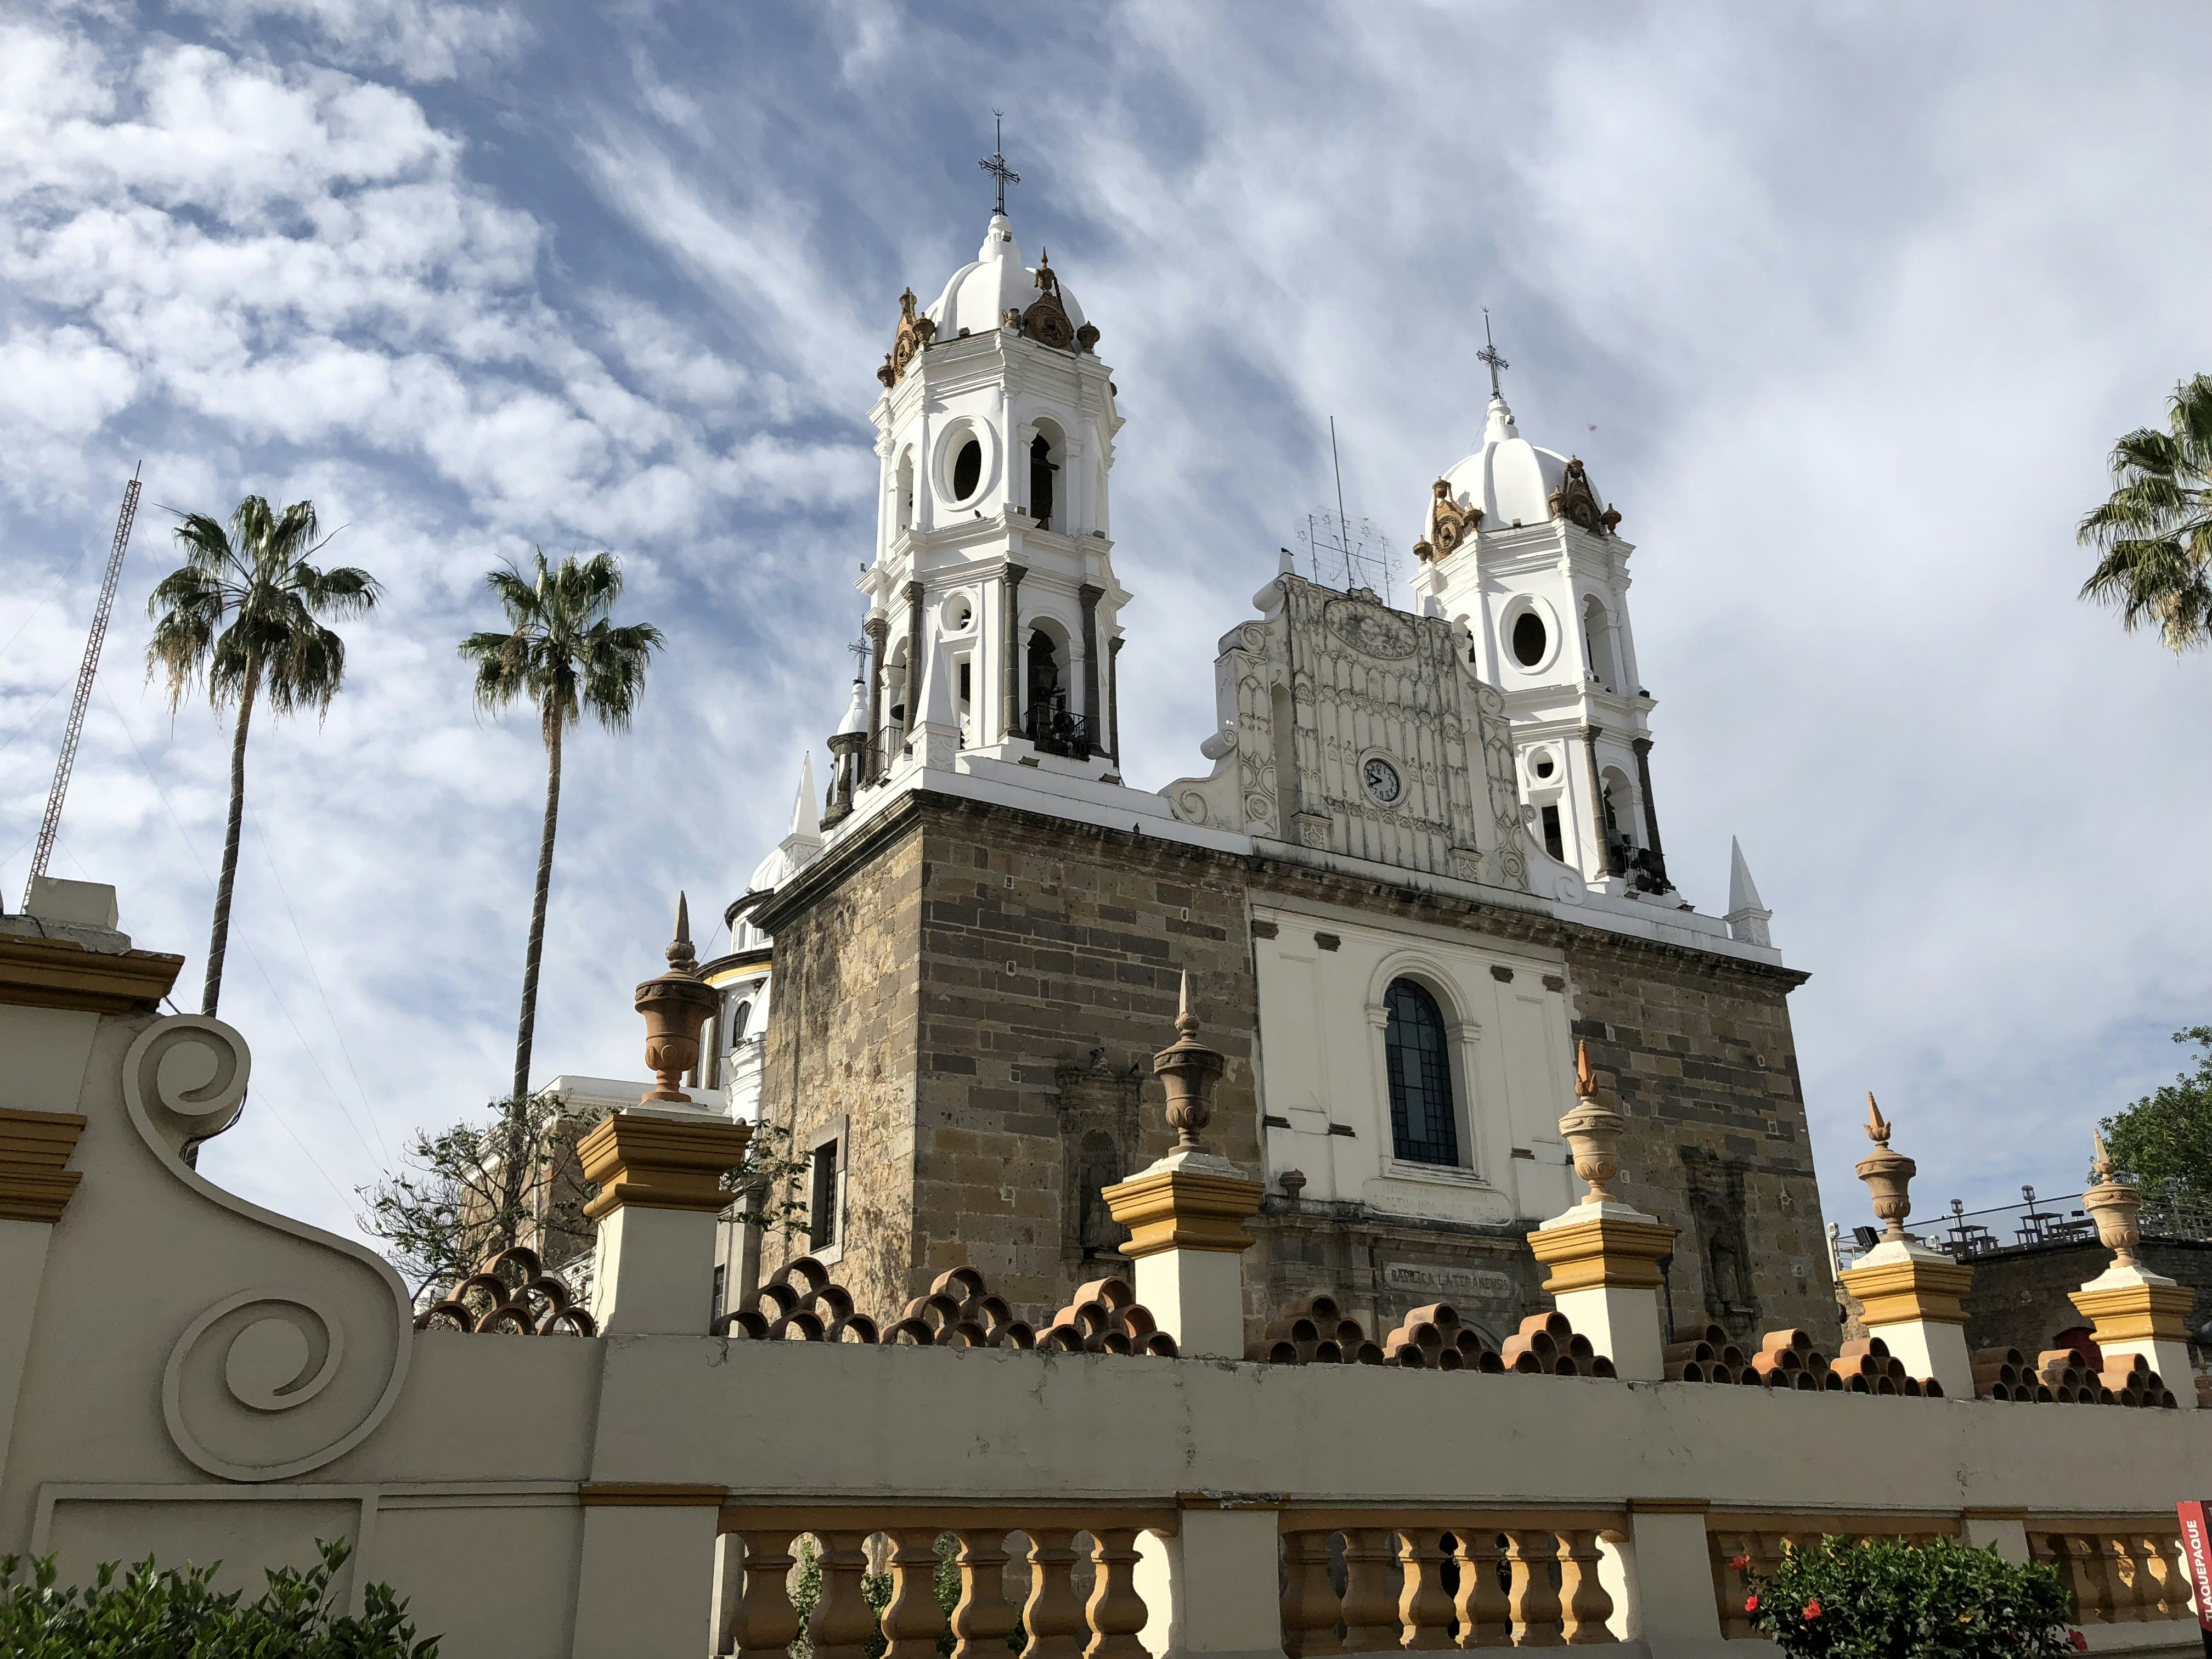 One of the imposing churches in Tlaquepaque, Mexico, with white domes, a stone facade and palm trees next to it.